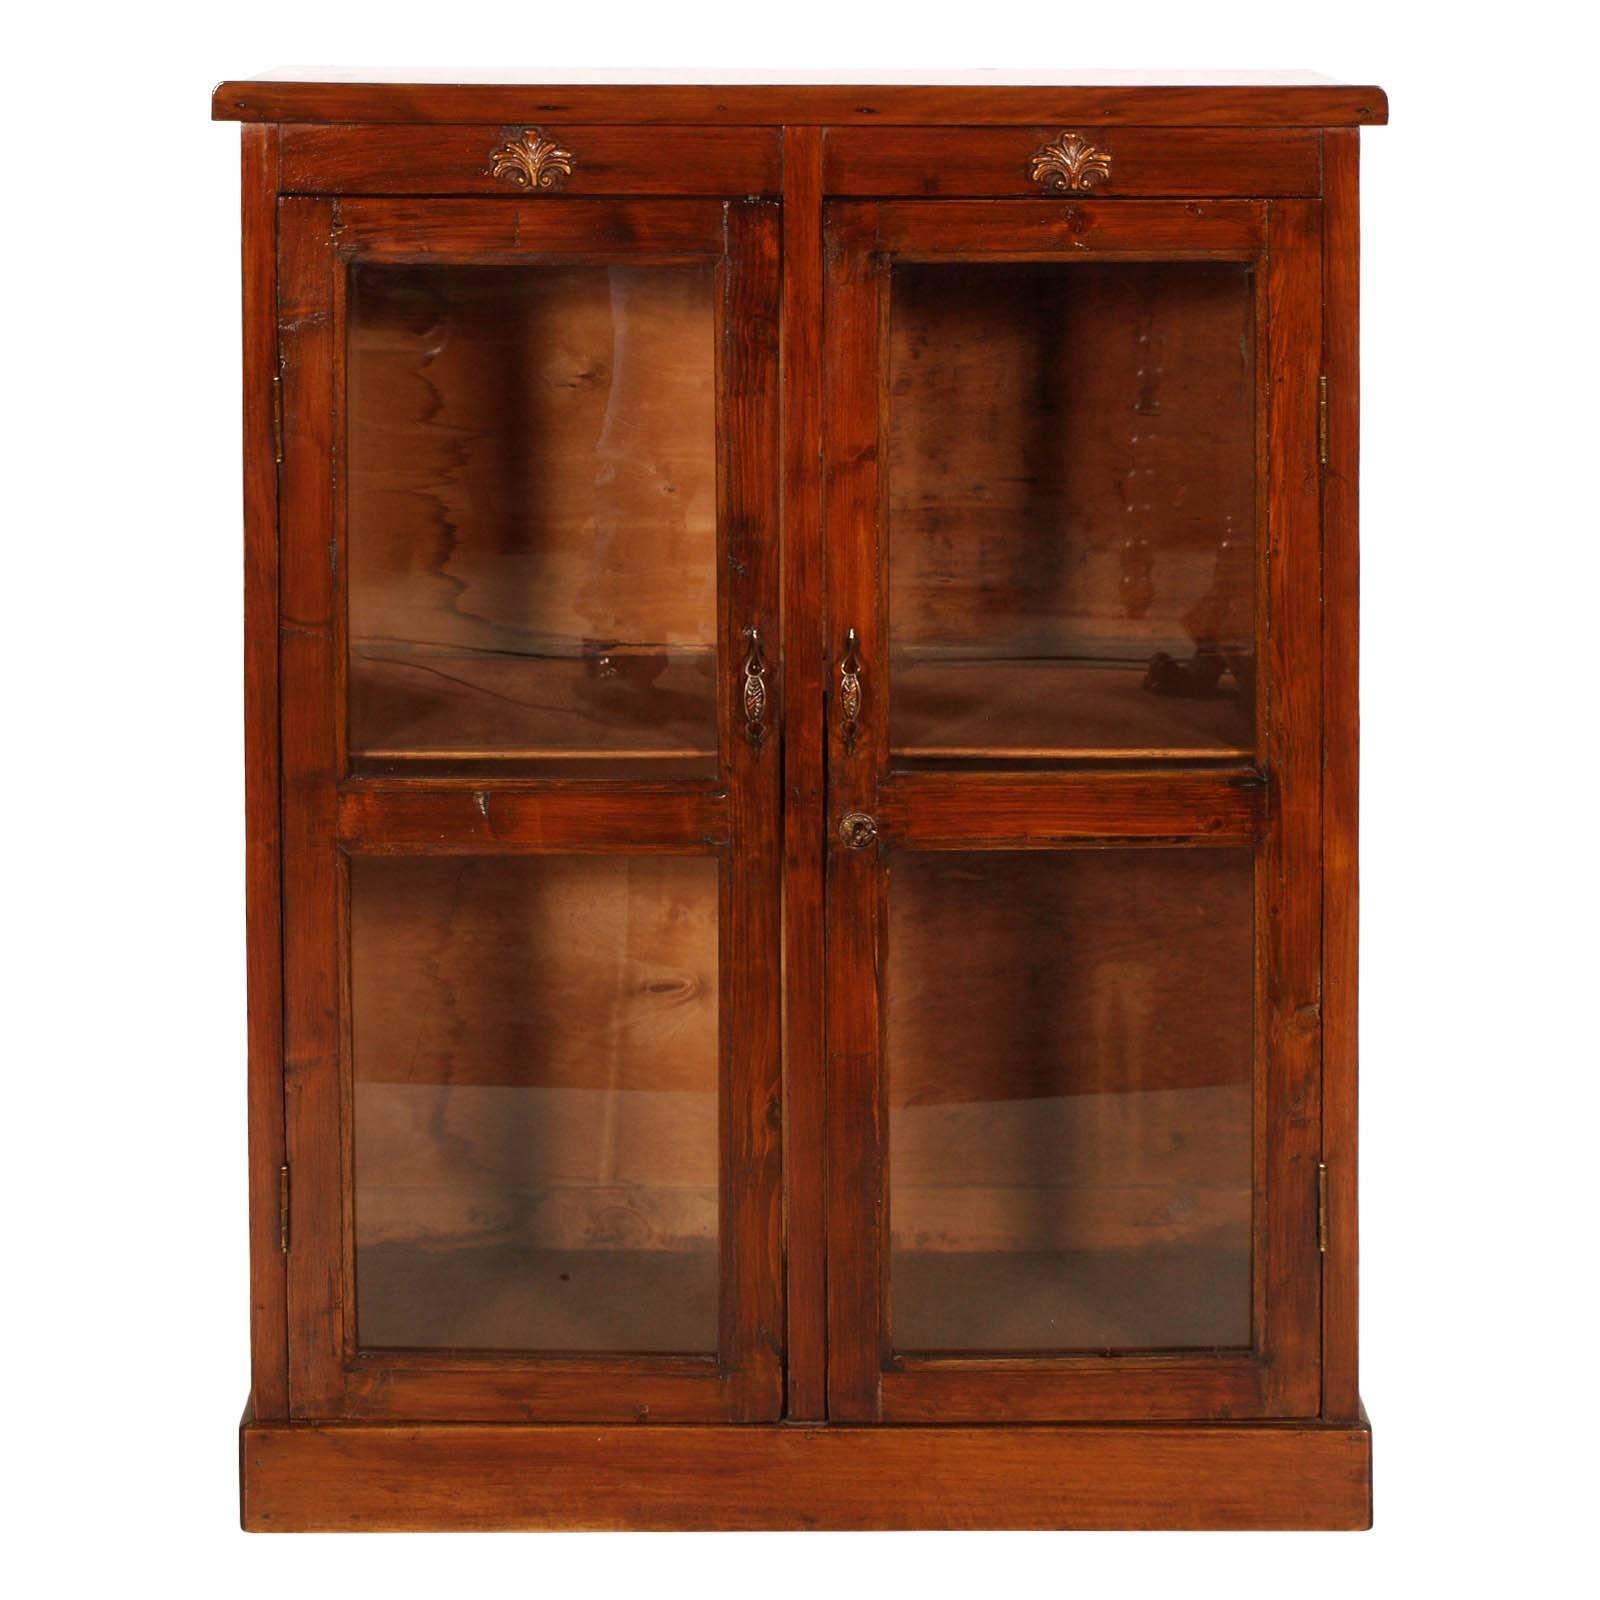 Late 19th Century Country Glazed Cabinet with Secret on Top Walnut Wax-Polished